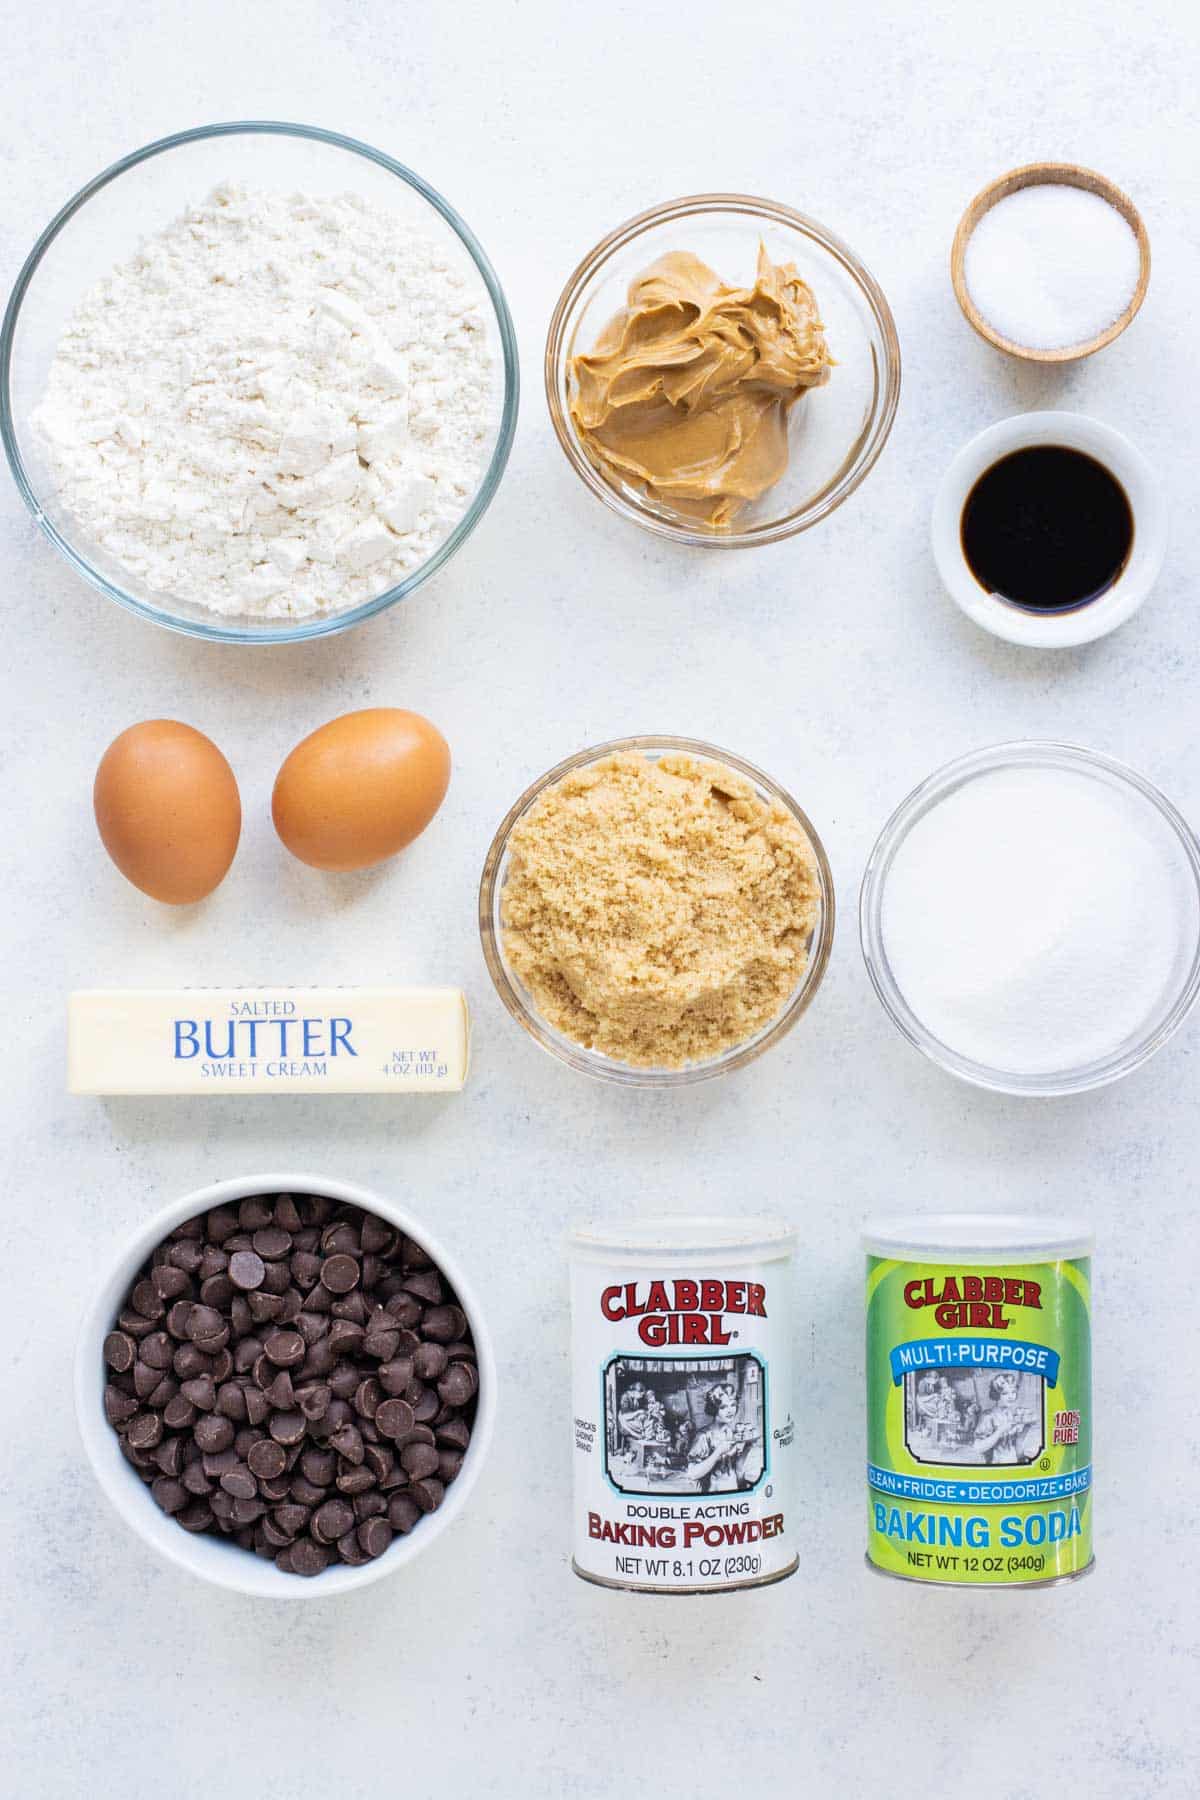 Peanut butter, flour, chocolate chips, sugar, and eggs are the ingredients for these cookies.